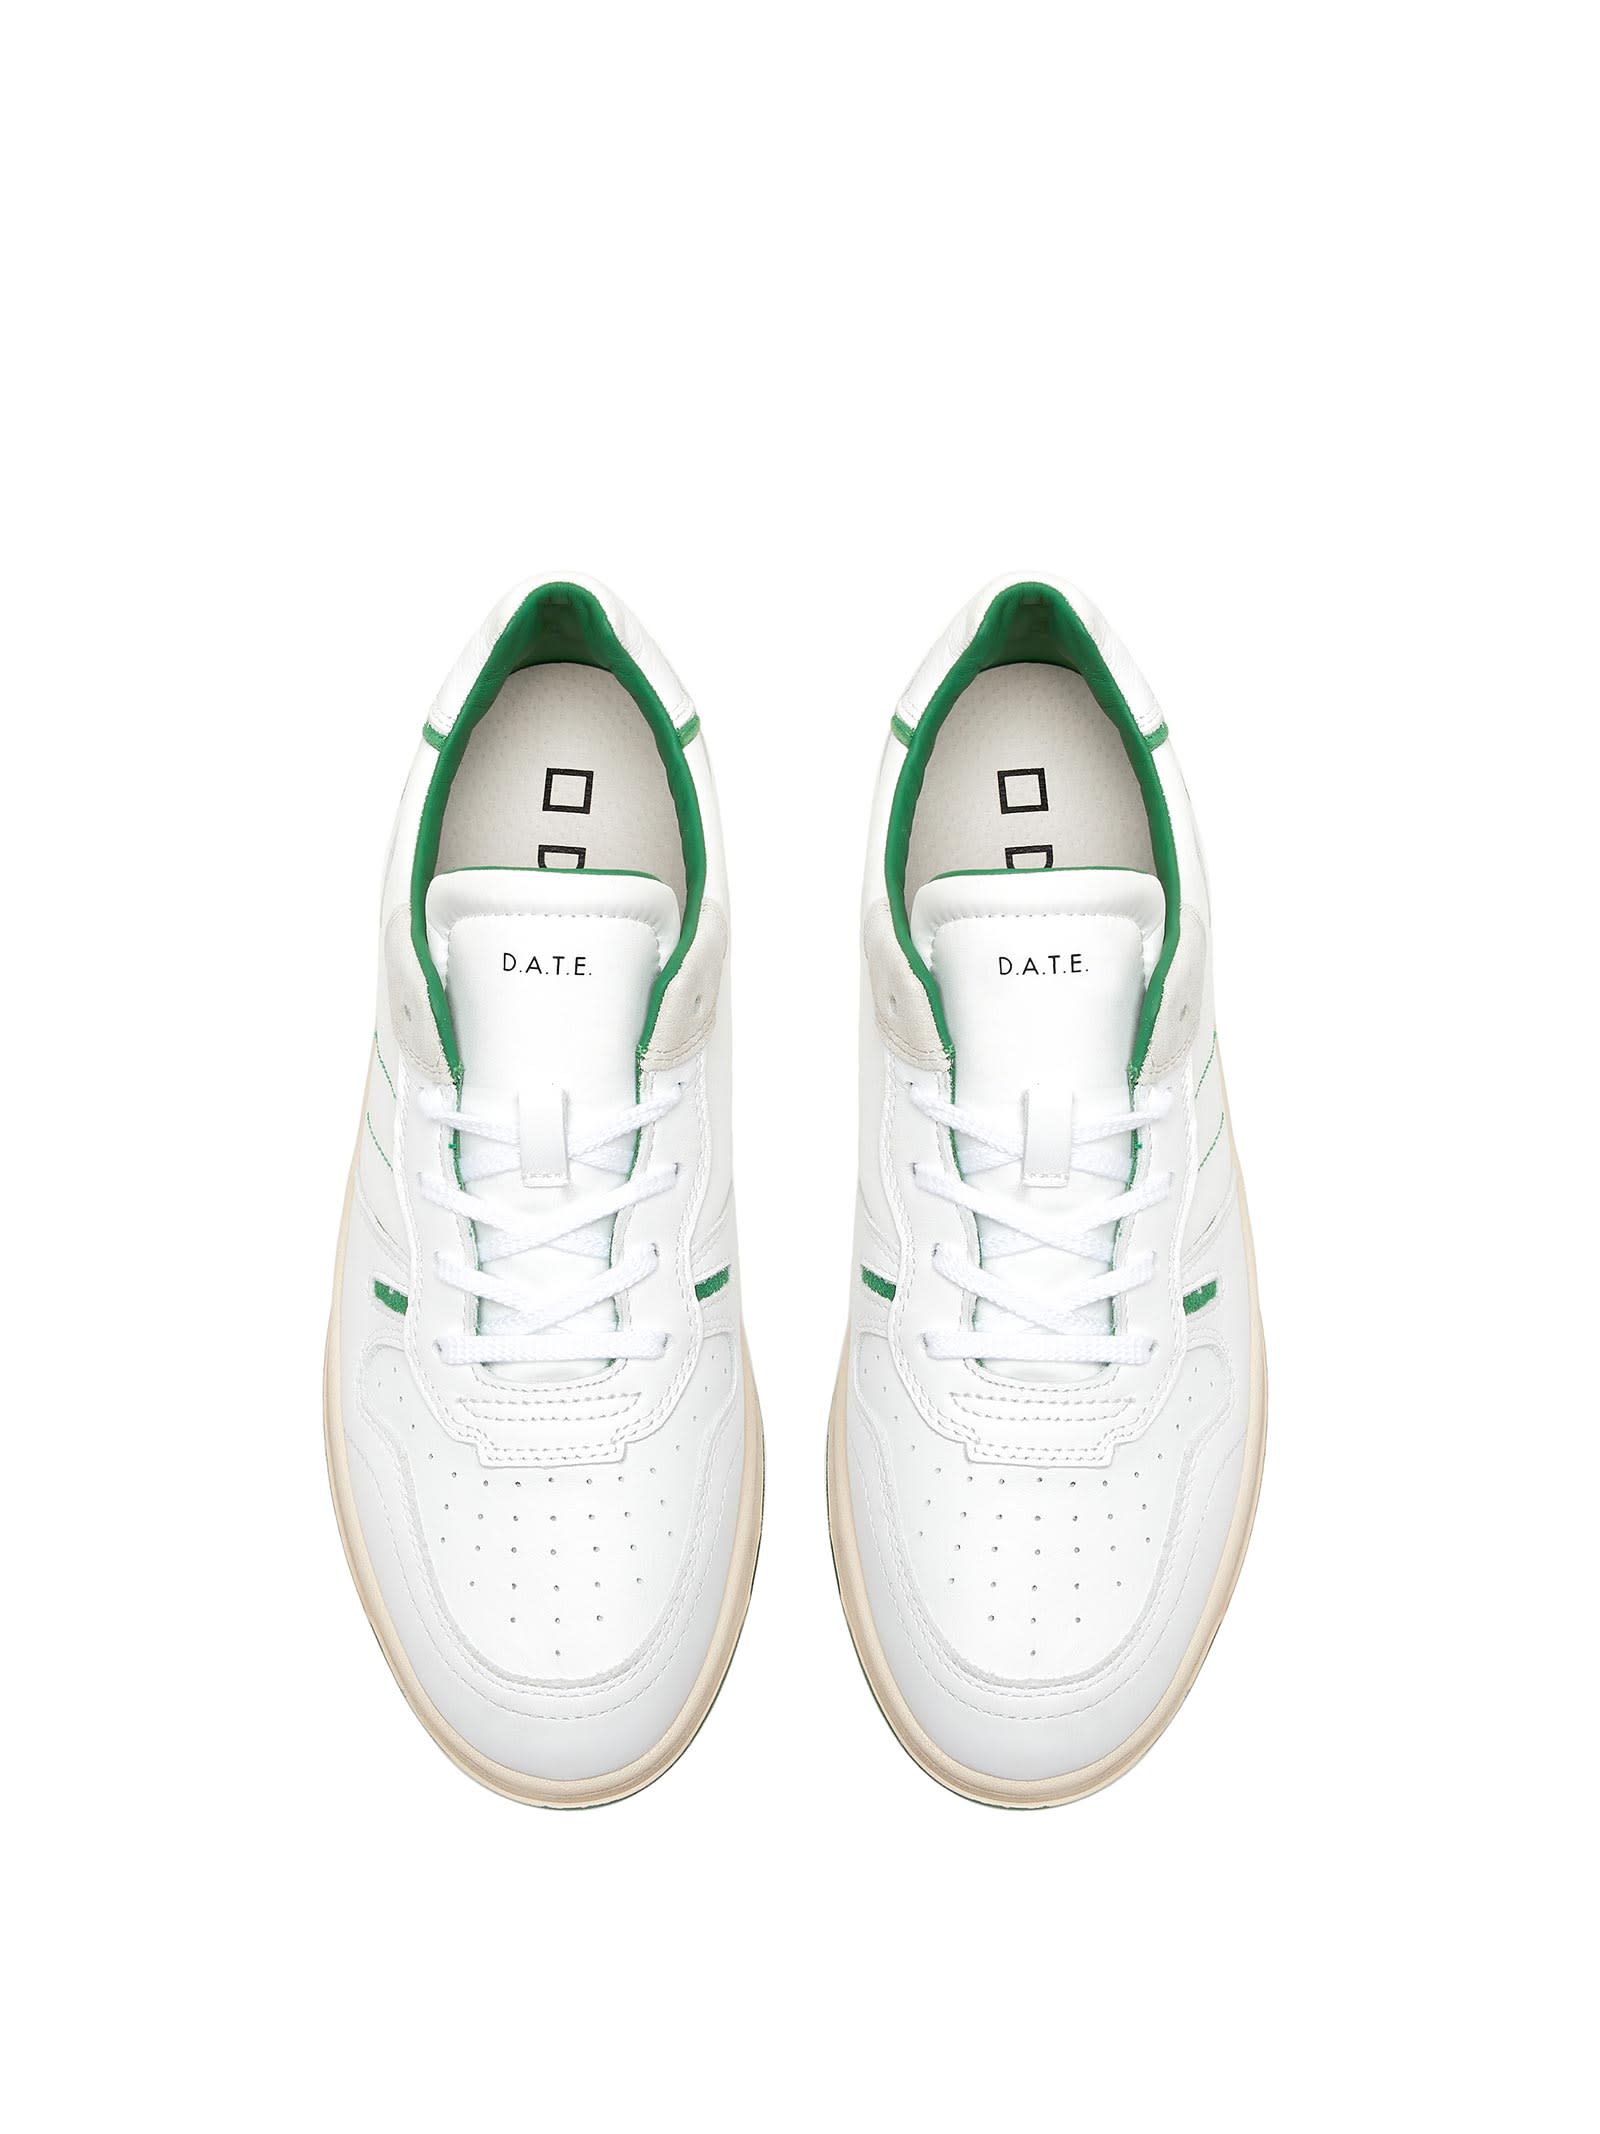 Shop Date Court 2.0 White Green Leather Sneaker